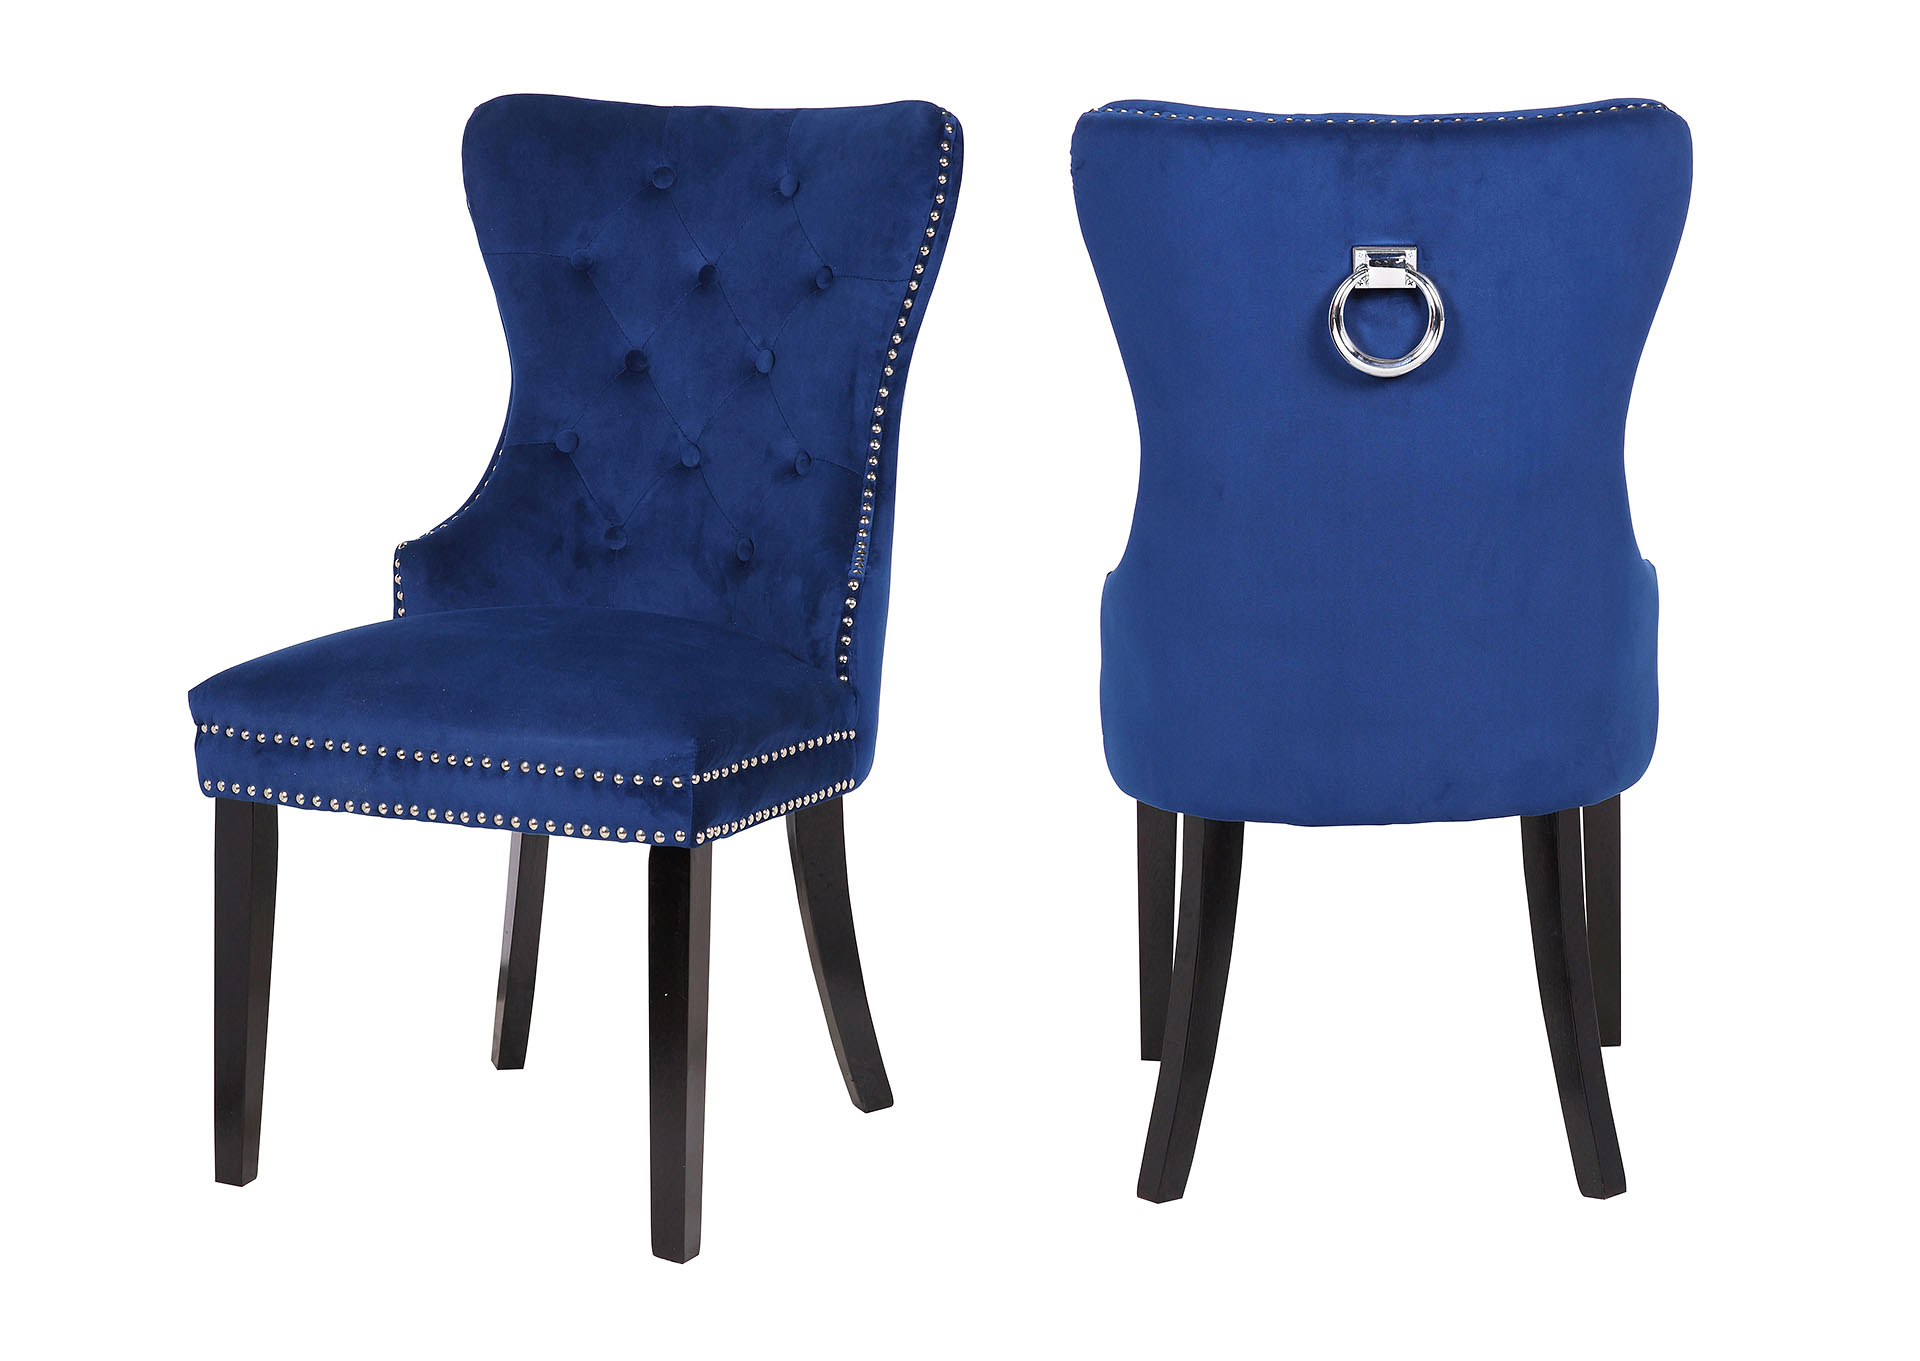 Erica Blue Accent chairs / dining chairs,Galaxy Home Furniture